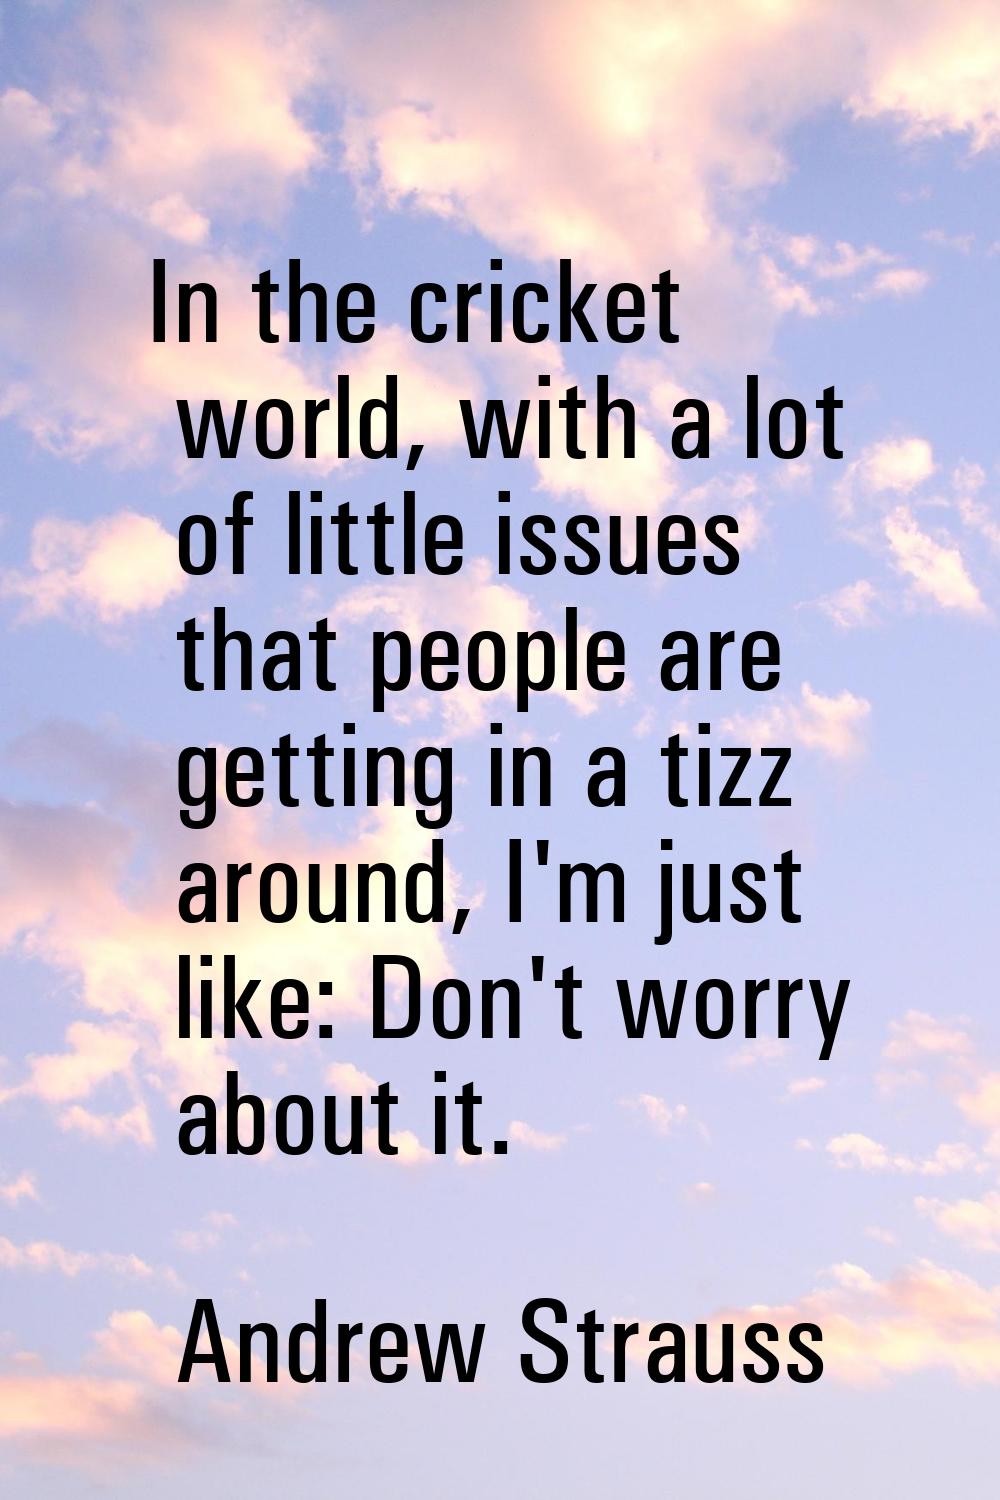 In the cricket world, with a lot of little issues that people are getting in a tizz around, I'm jus